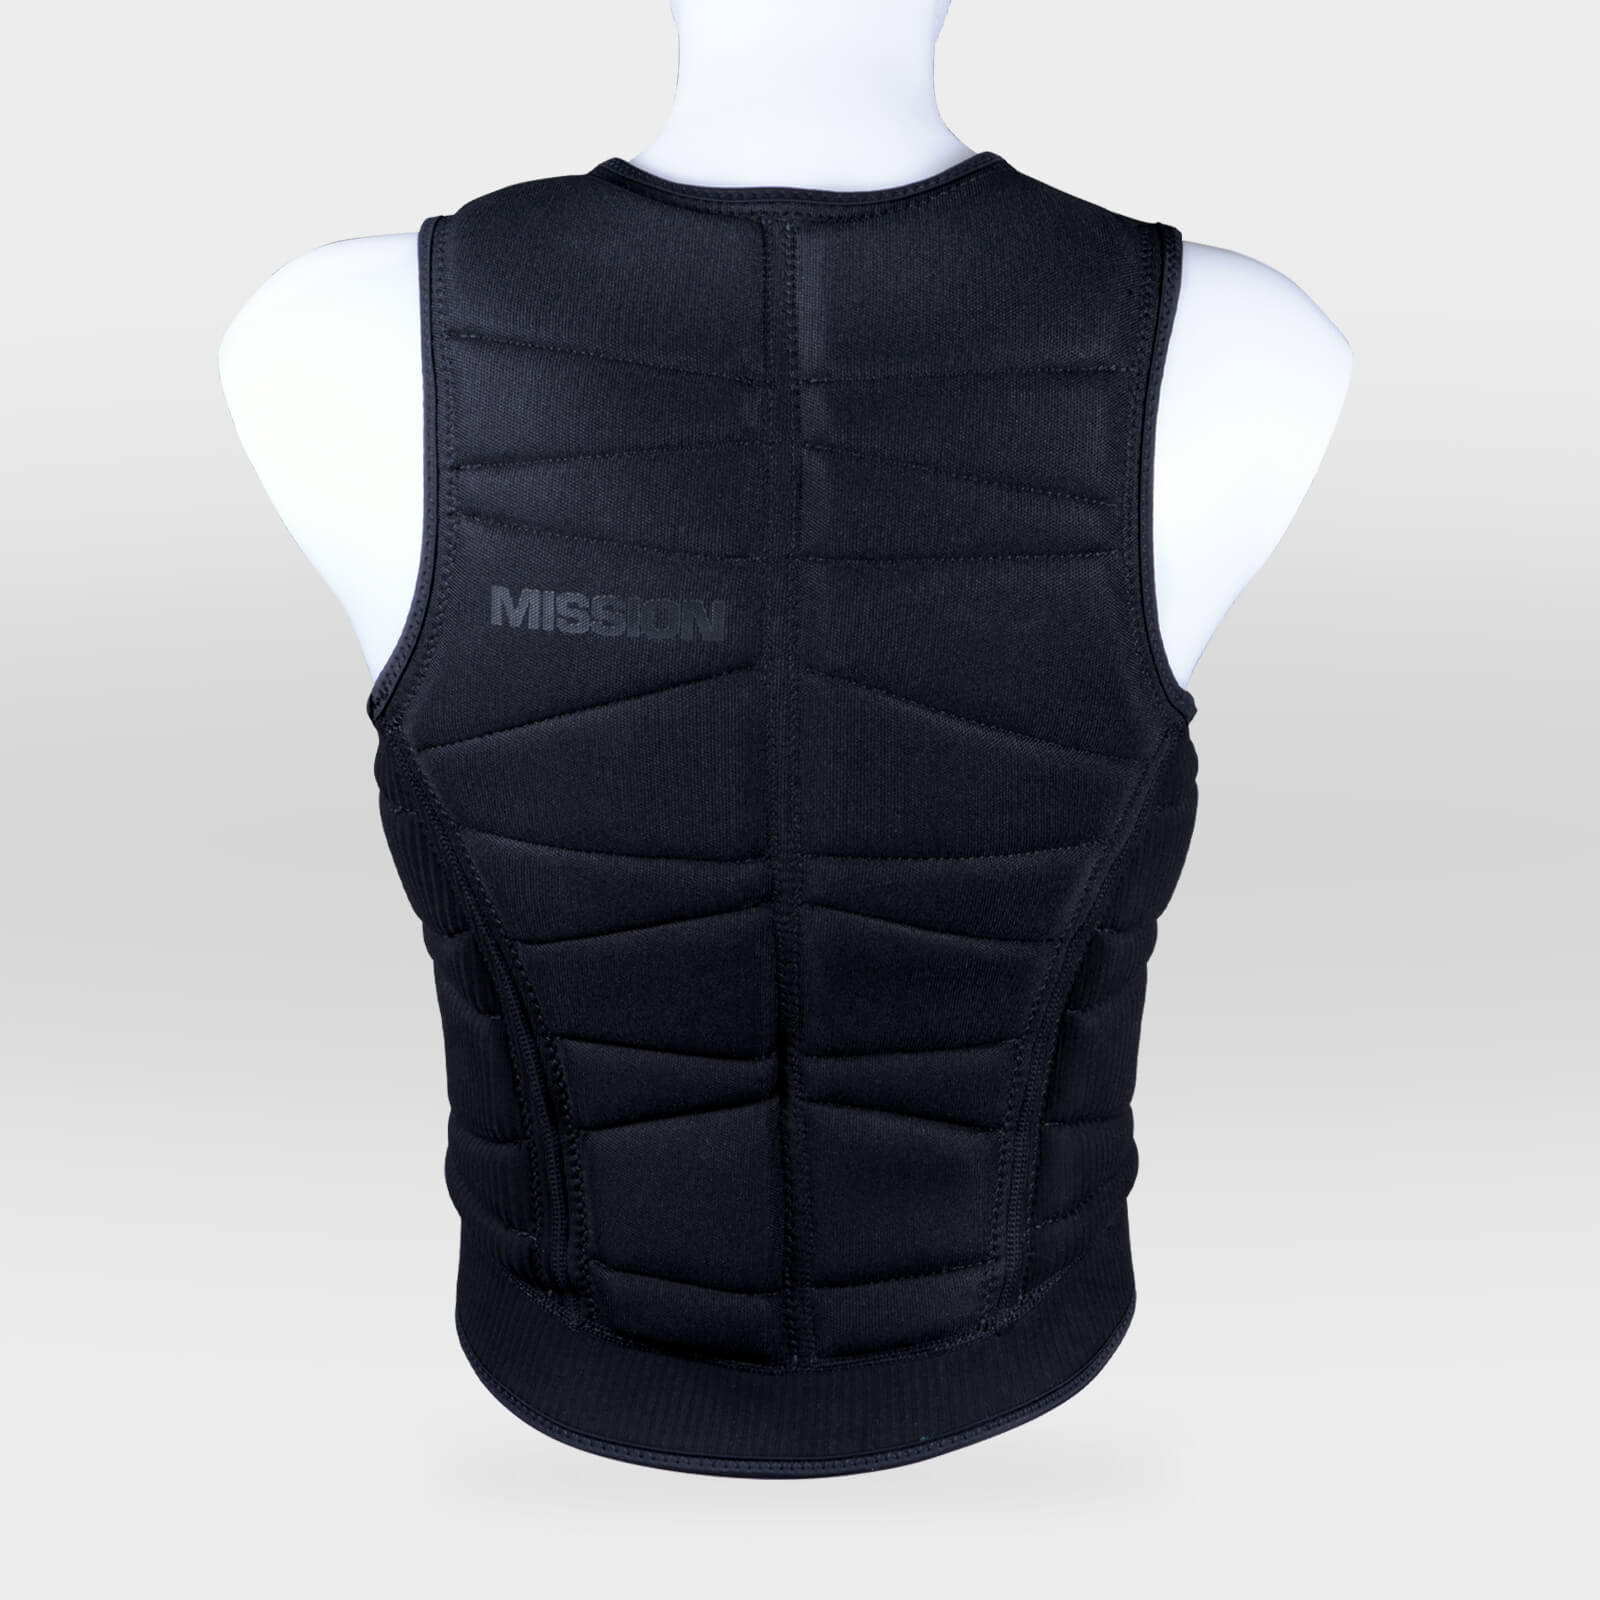 ONDO vest in blacked out